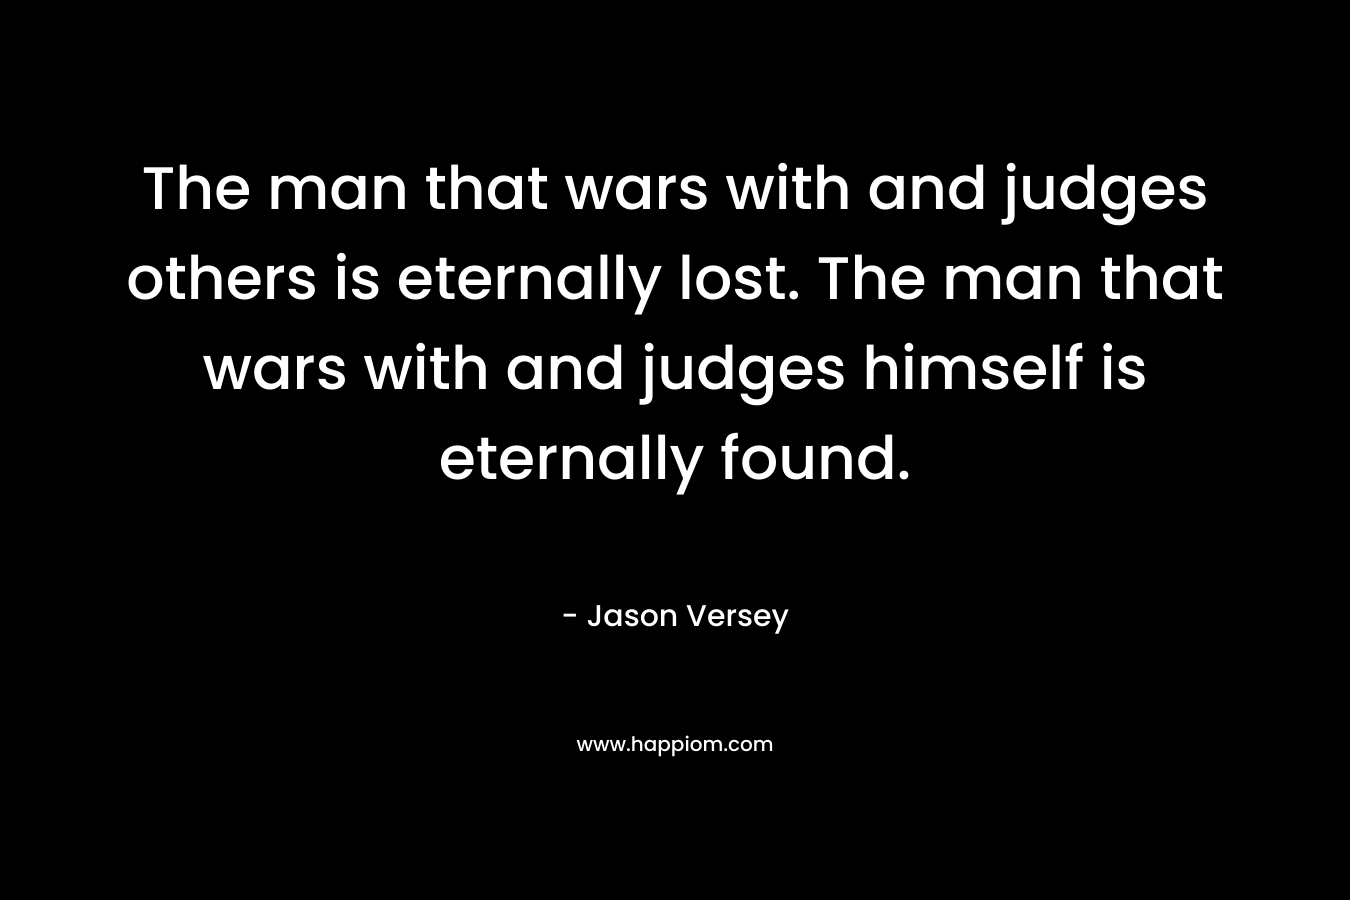 The man that wars with and judges others is eternally lost. The man that wars with and judges himself is eternally found.